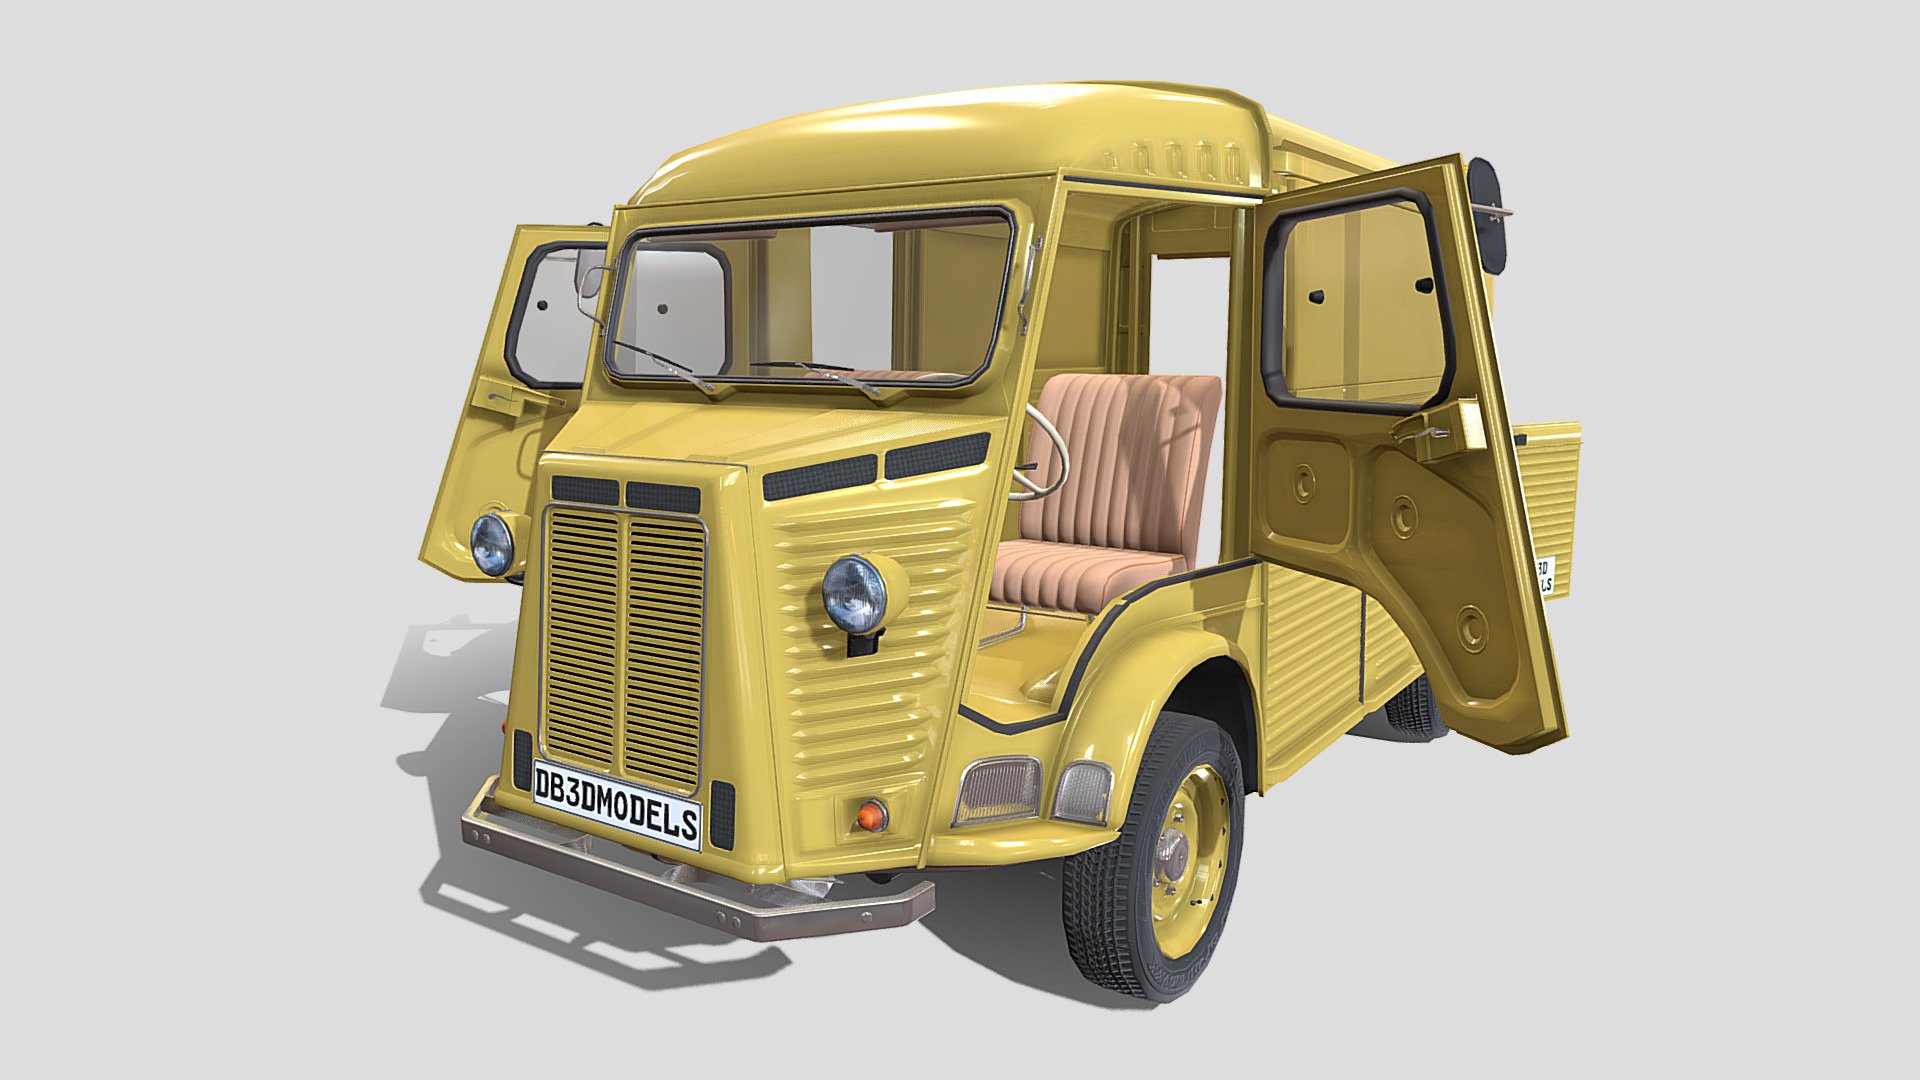 Highly detailed Generic 40s Van 3D model rendered with Cycles in Blender, as per seen on attached images.

The model is very intricately built, it has the interior modeled, with the rear cargo area, and a simple underbody built as well. 

The 3d model is scaled to original size in Blender.

File formats:

-.blend, rendered with cycles, as seen in the images;

-.blend, rendered with cycles, as seen in the images, with doors open;

-.obj, with materials applied;

-.obj, with materials applied, with doors open;

-.dae, with materials applied;

-.dae, with materials applied, with doors open;

-.fbx, with materials applied;

-.fbx, with materials applied, with doors open;

-.stl;

-.stl, with doors open;

Files come named appropriately and split by file format.

3D Software:

The 3D model was originally created in Blender 3.1 and rendered with Cycles.

Materials and textures: - Generic 40s Van with interior - Buy Royalty Free 3D model by dragosburian 3d model